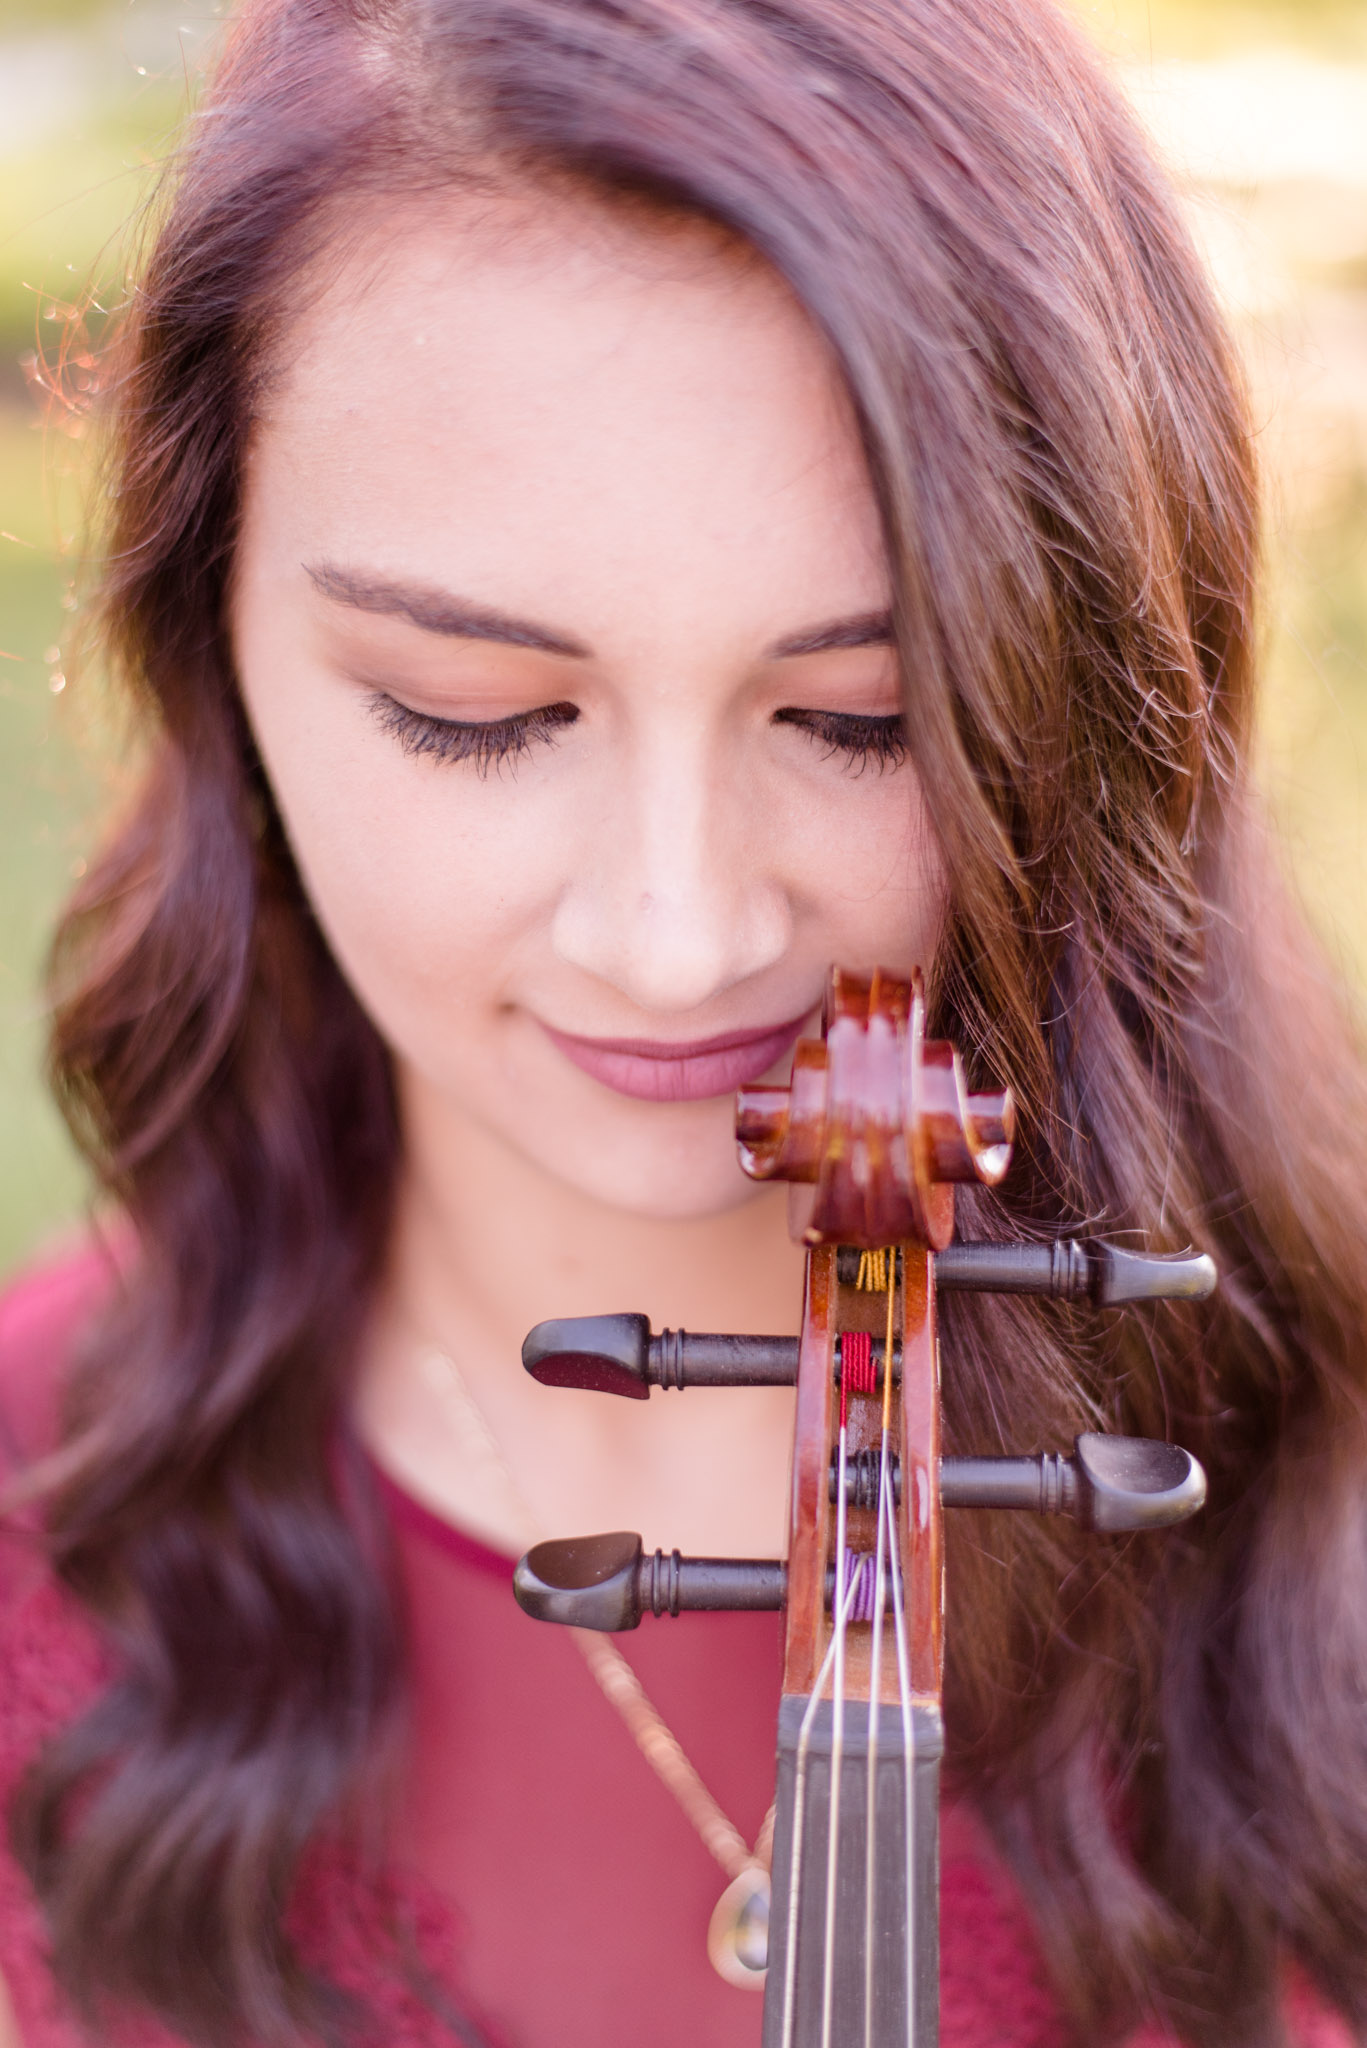 High school senior poses with tip of viola